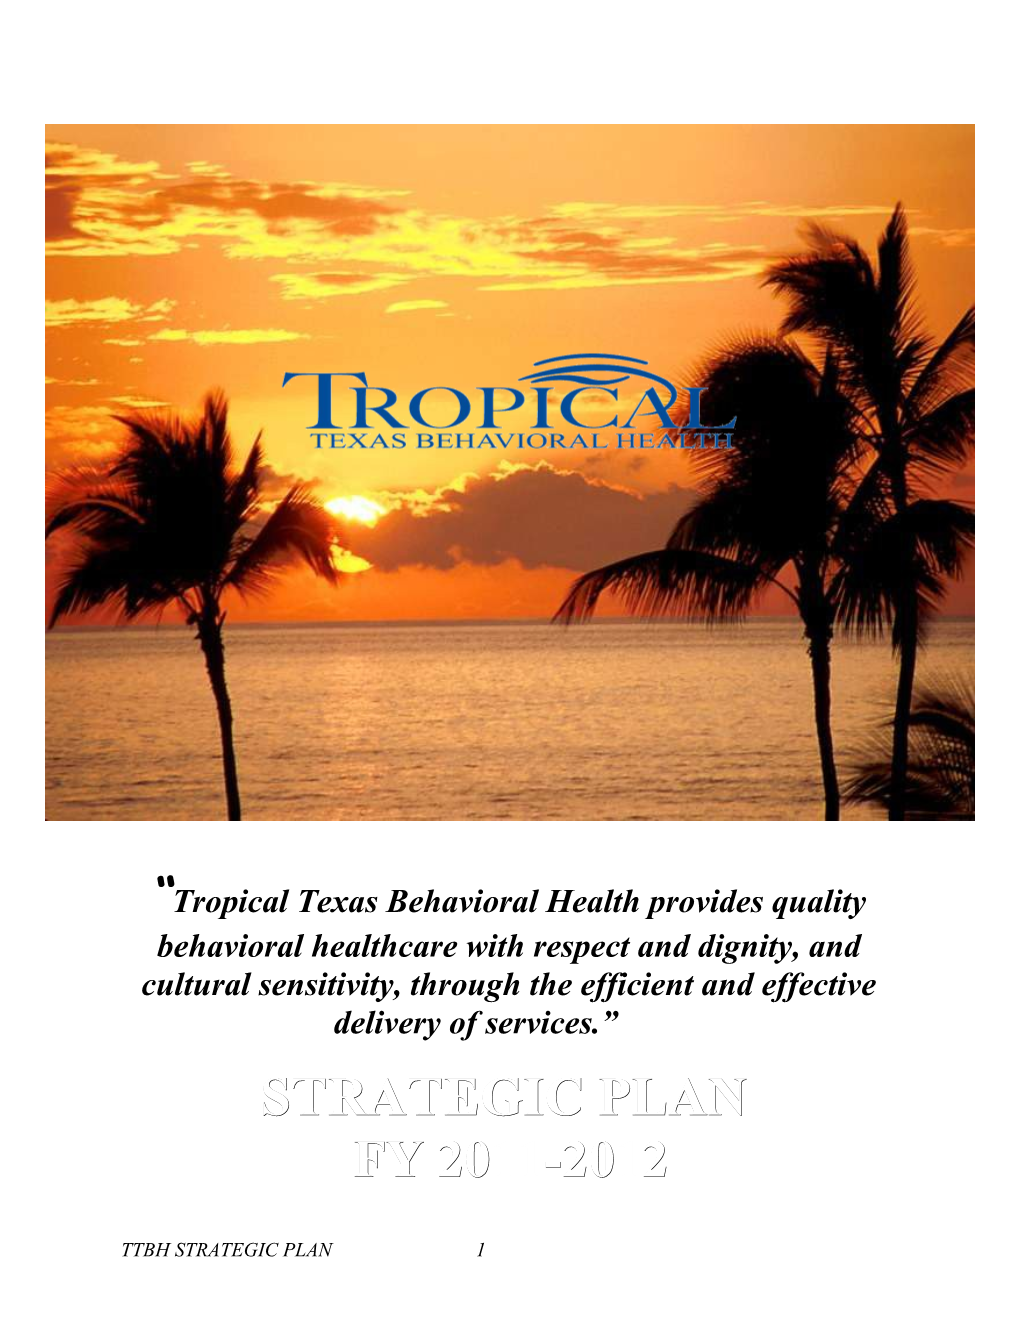 Tropical Texas Behavioral Health Provides Quality Behavioral Healthcare with Respect And